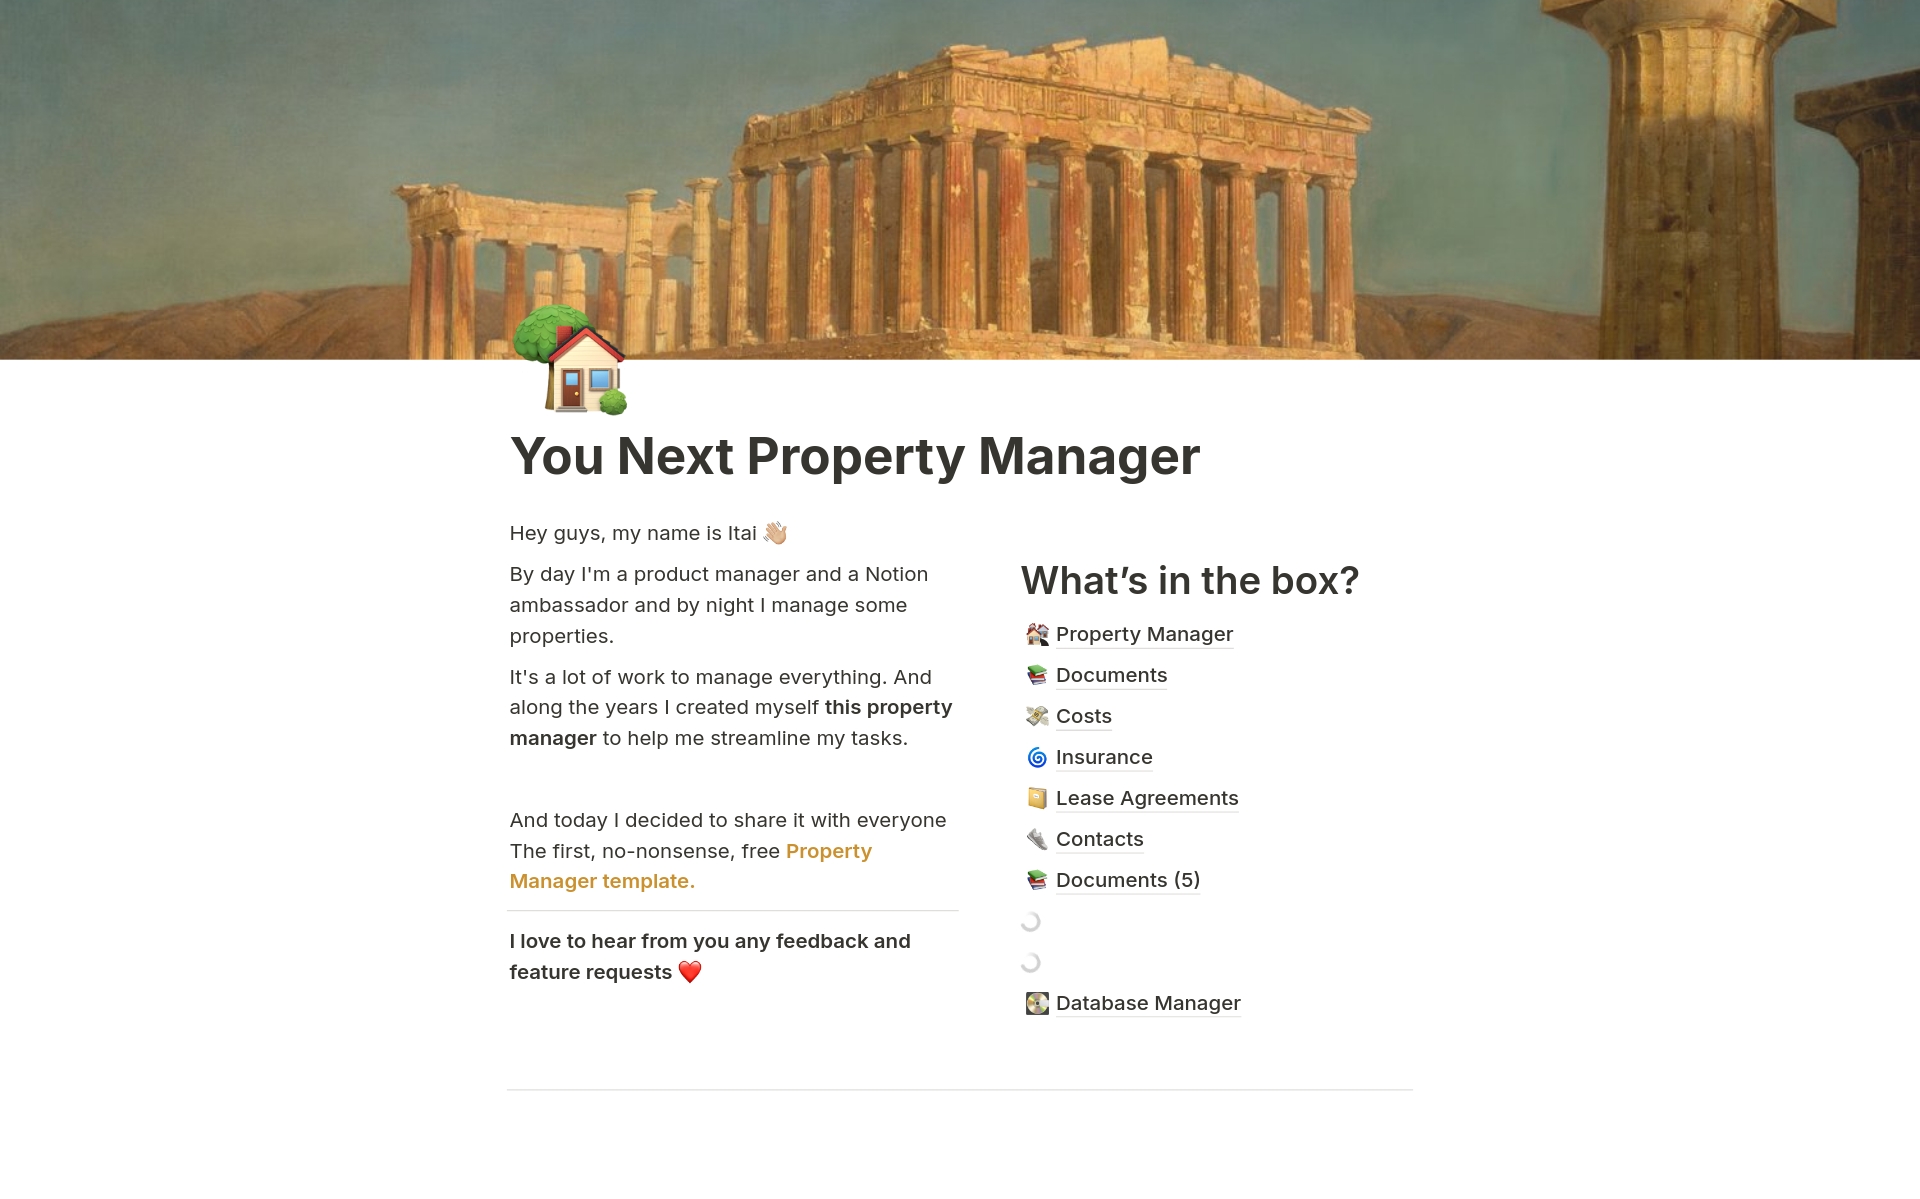 Free, no-nonsense, property manager tool.
Collaborate with your team to many. number of properties.